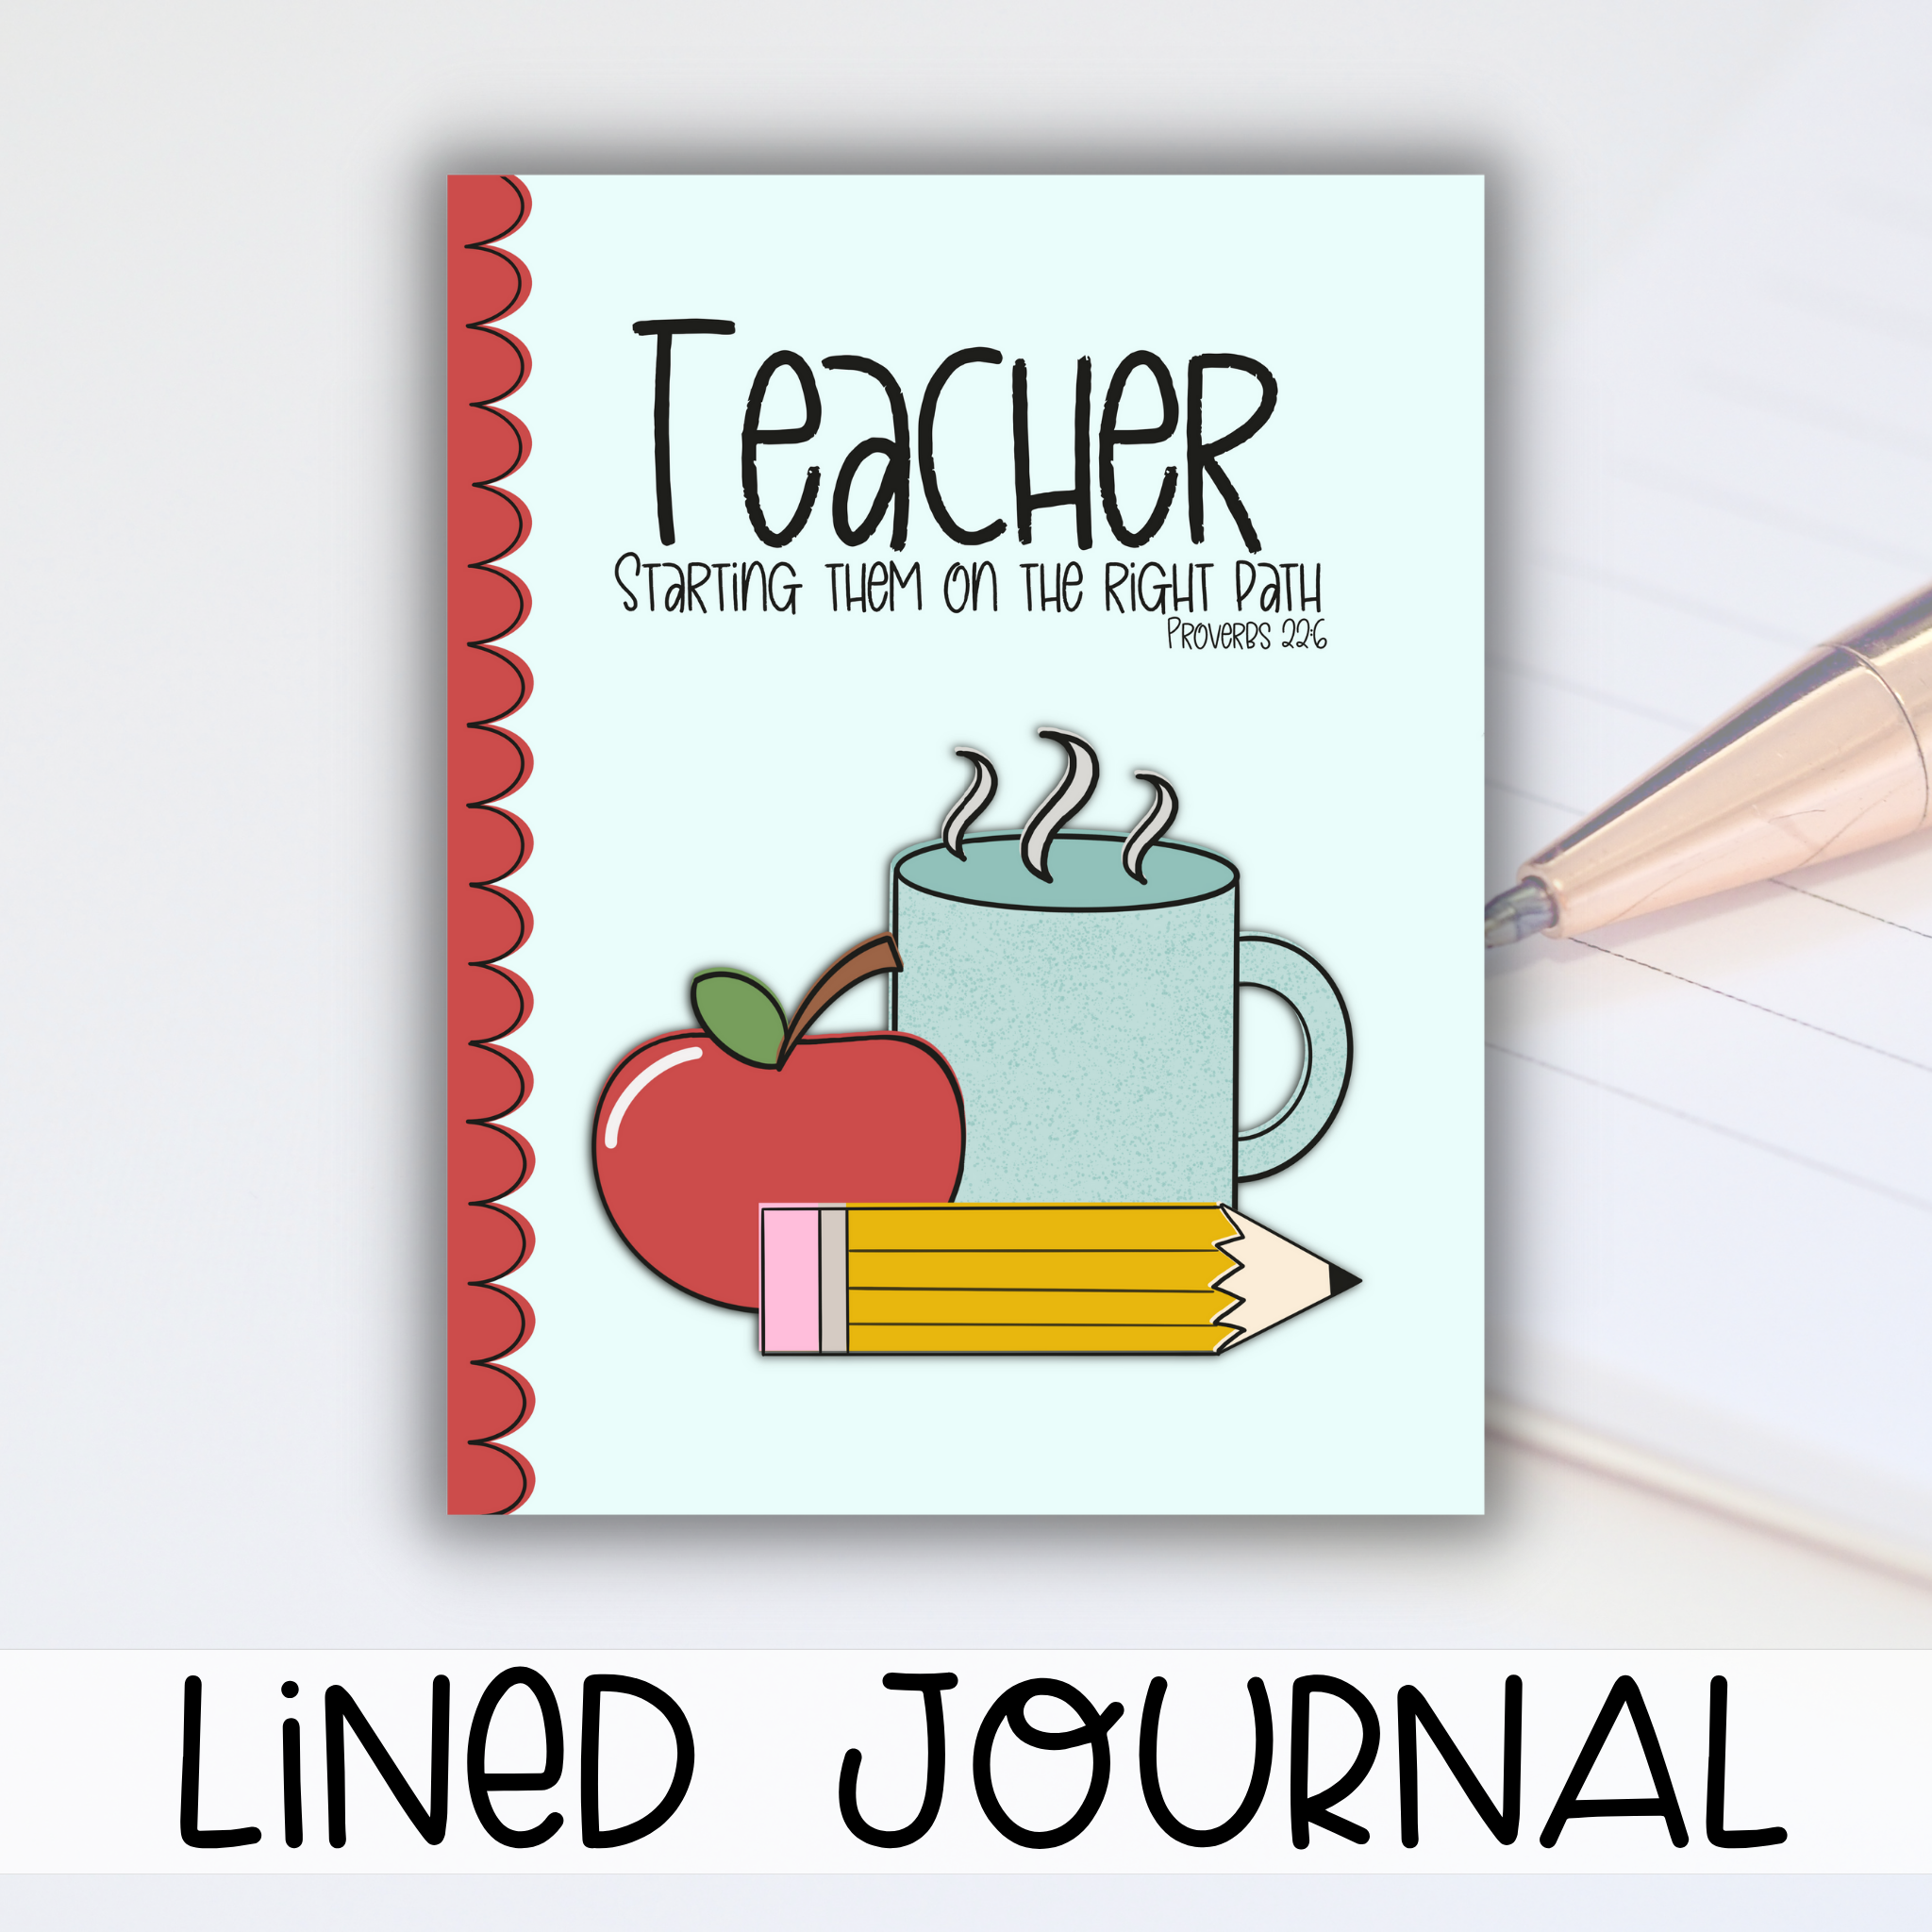 Teaching Lined Journal self published Amazon KDP and Kindle Direct Publishing, Teacher notes, gift, gifts, notebook